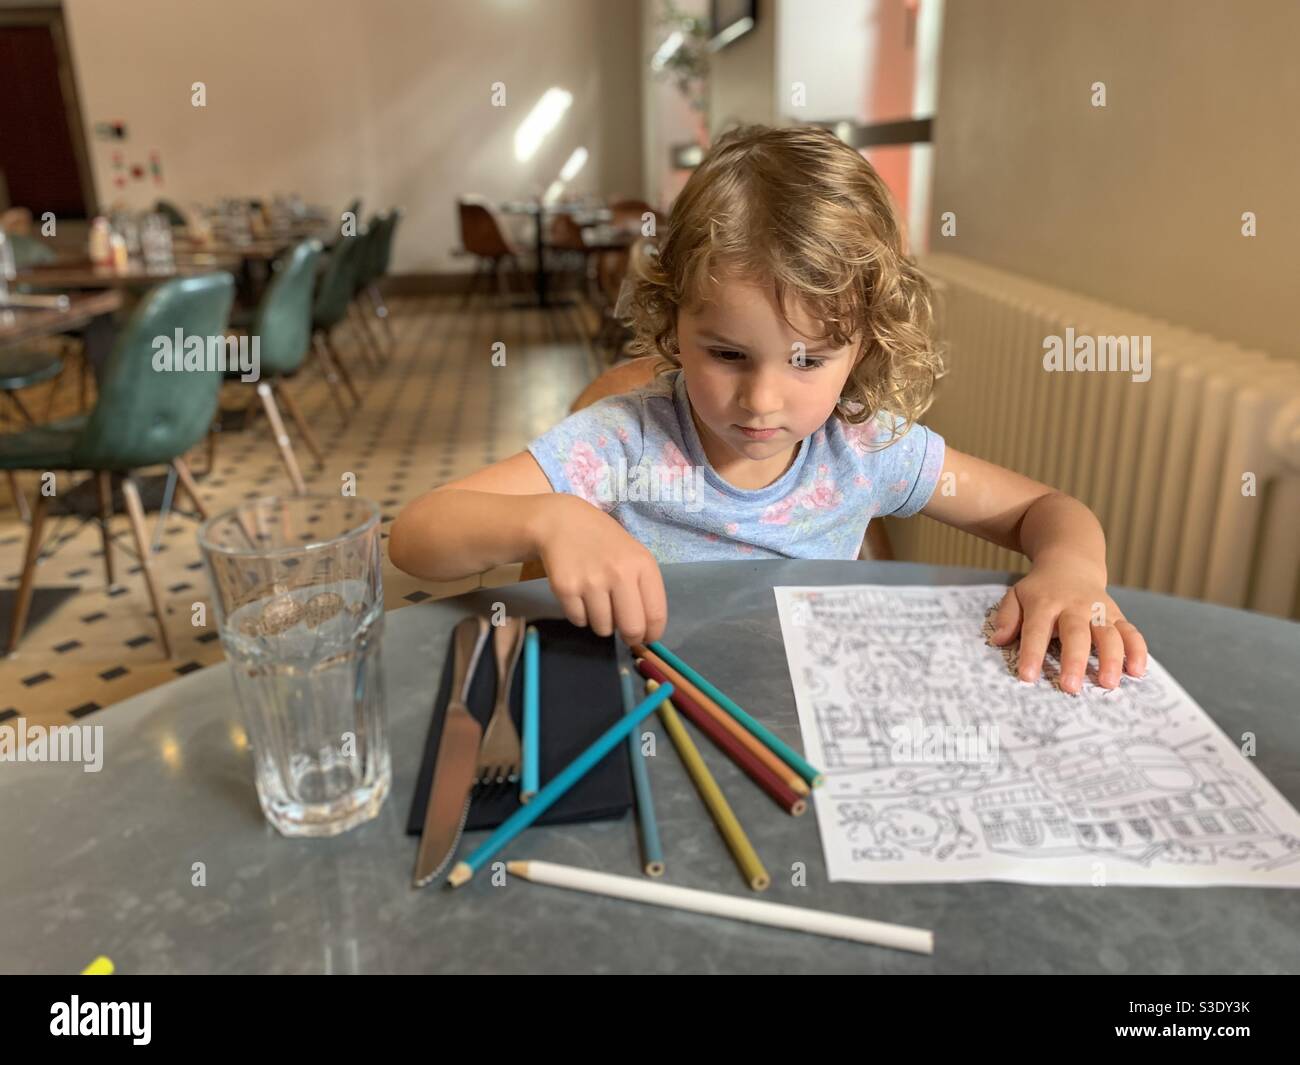 Little girl colouring in a restaurant Stock Photo